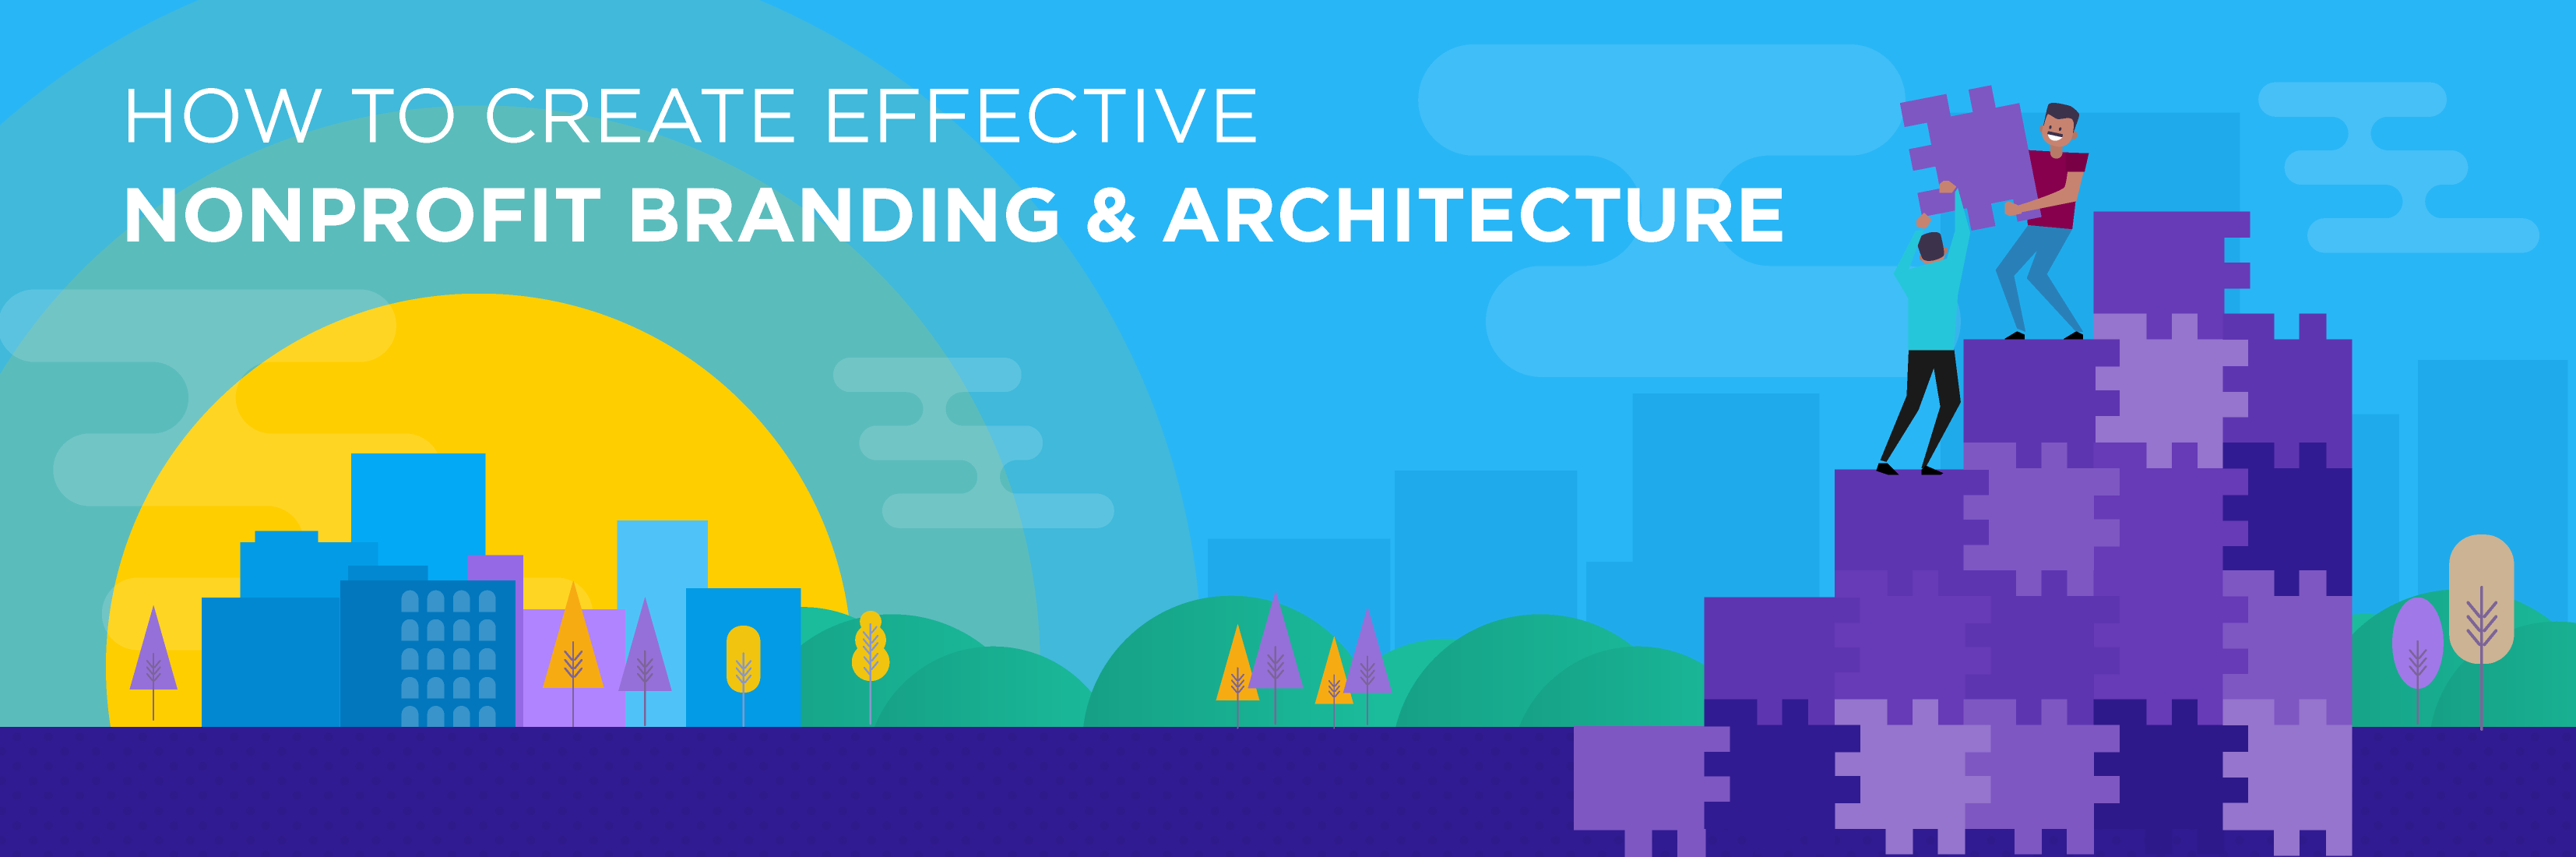 How to create effective nonprofit branding architecture- Part 1